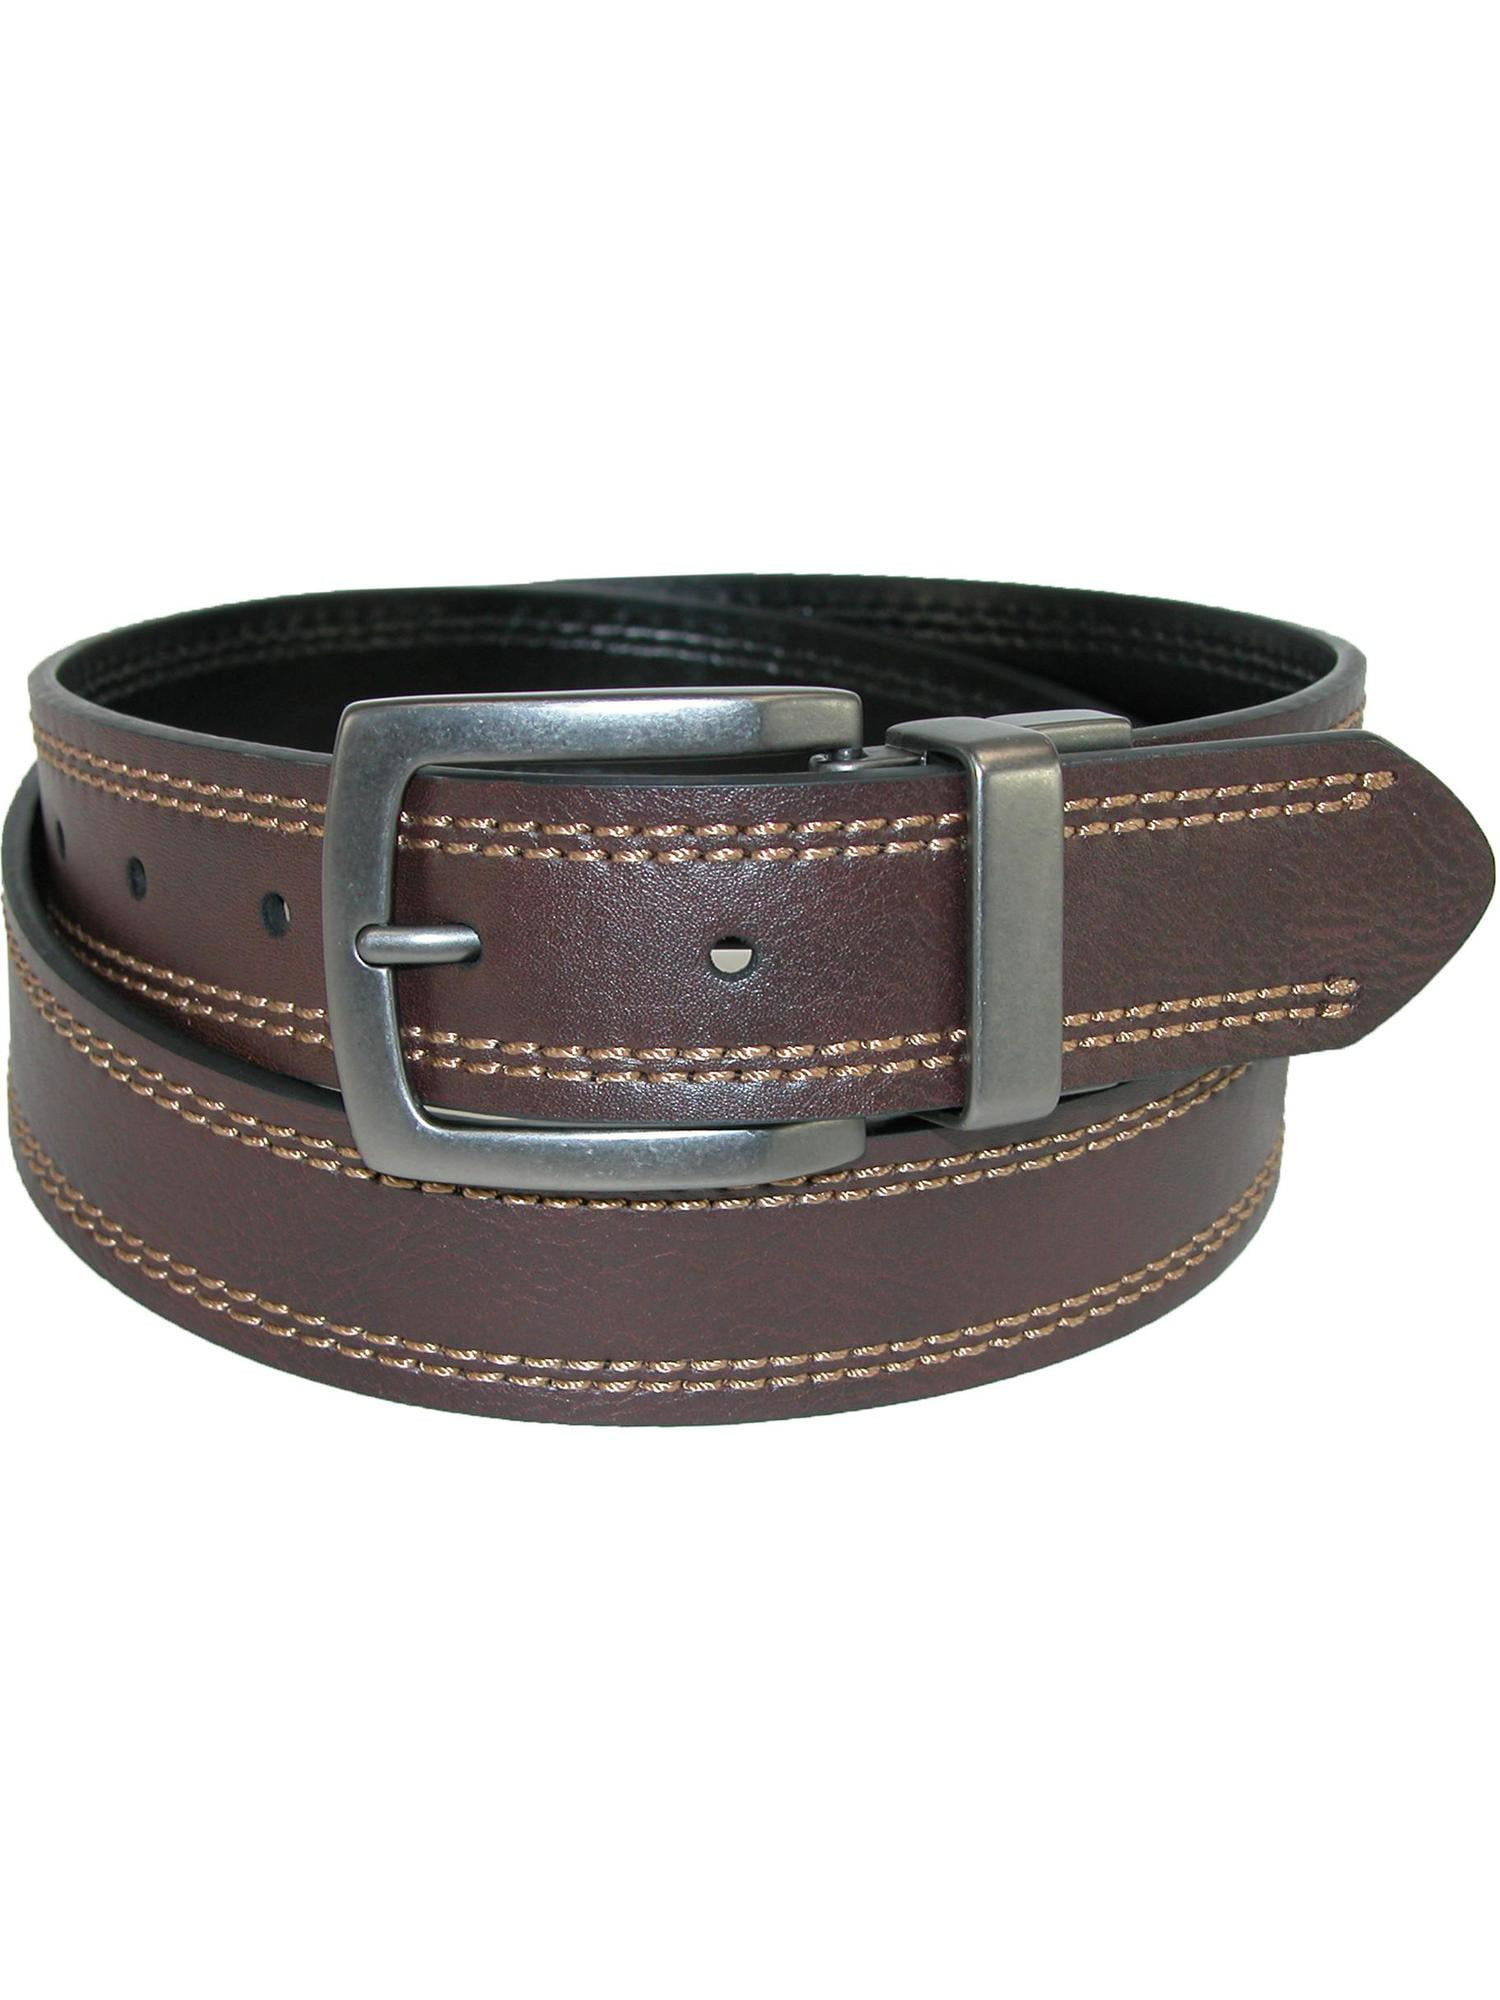 Reversible Belt with Detail Double Stitching - Walmart.com